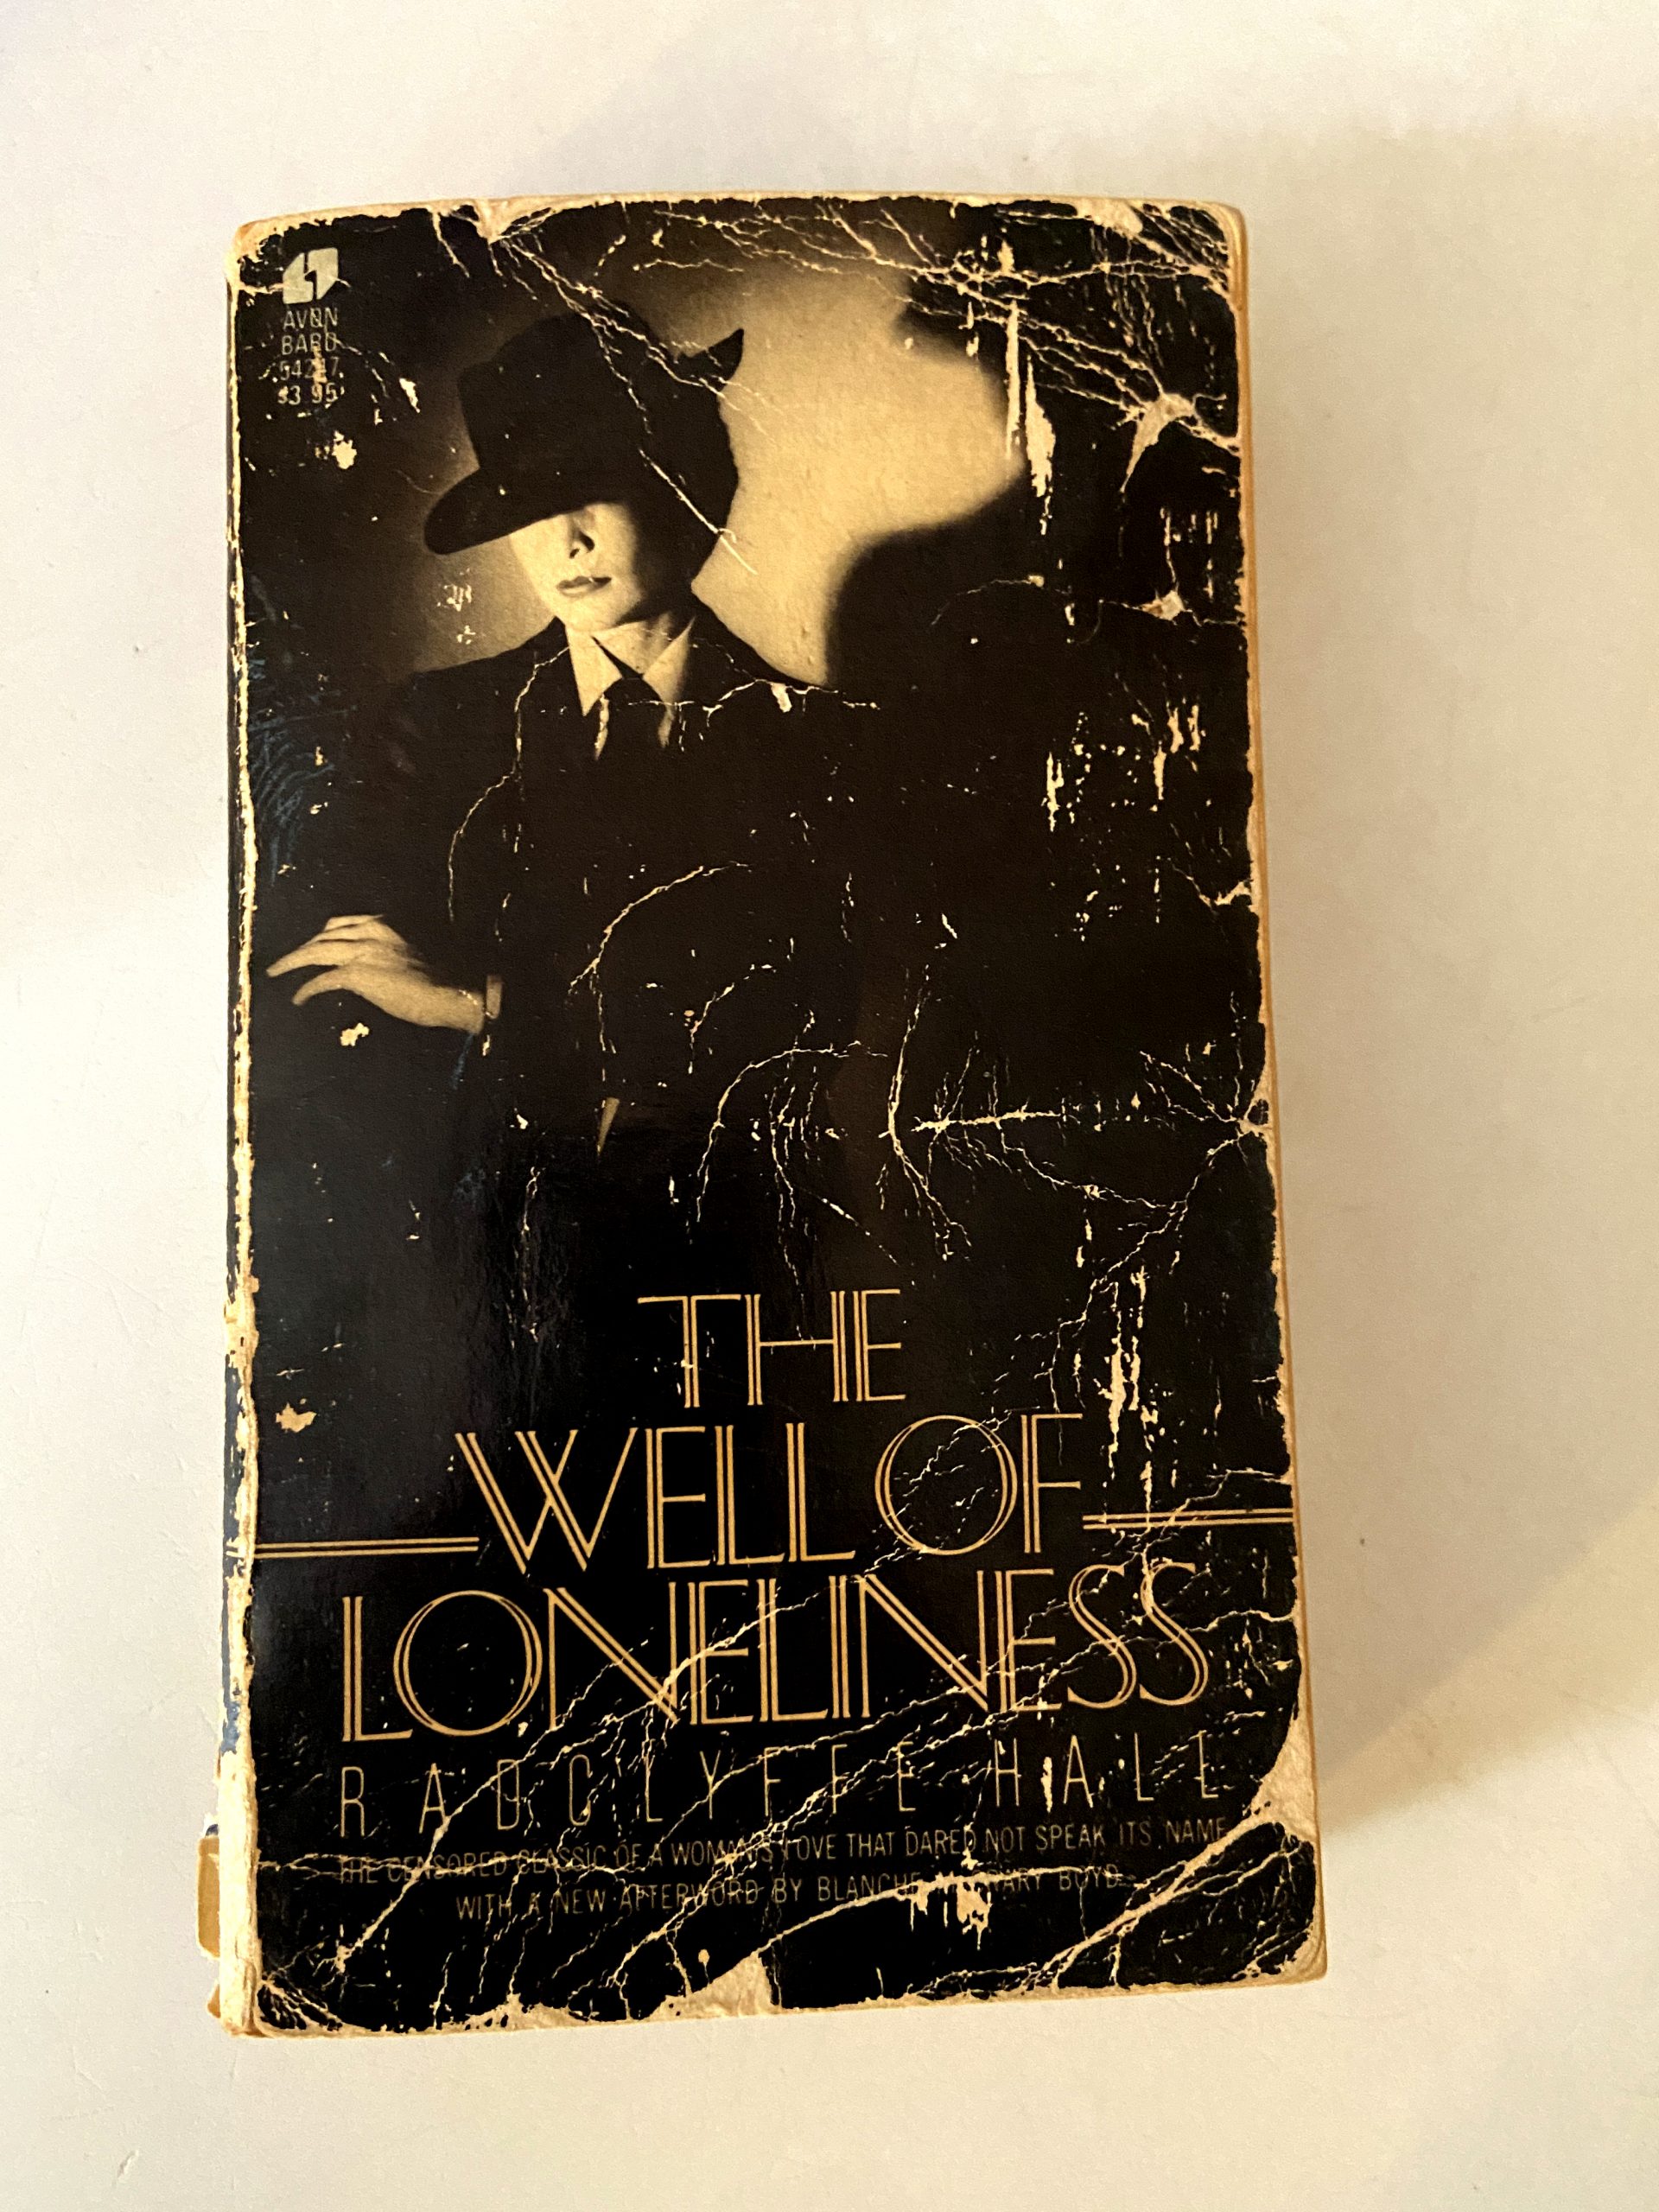 An old book with a half-lit woman in a suit on the cover.